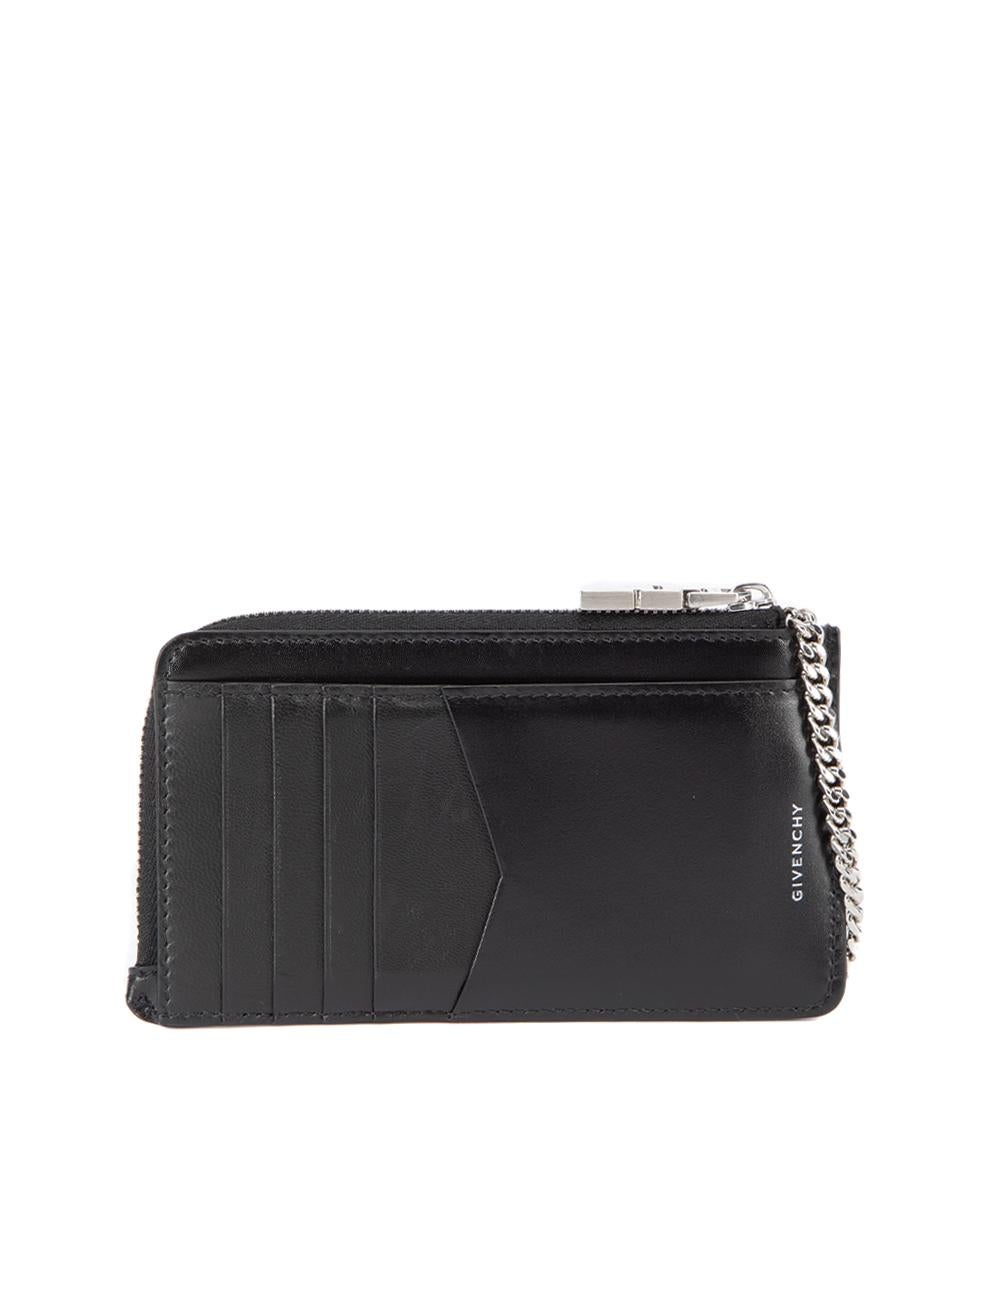 CONDITION is Never Worn. No visible wear to wallet is evident on this used Givenchy designer resale item. This item includes the original dustbag and box. Details Black Leather Wallet 4G Brand logo on buttoned pocket 1x Chained hook for attachment